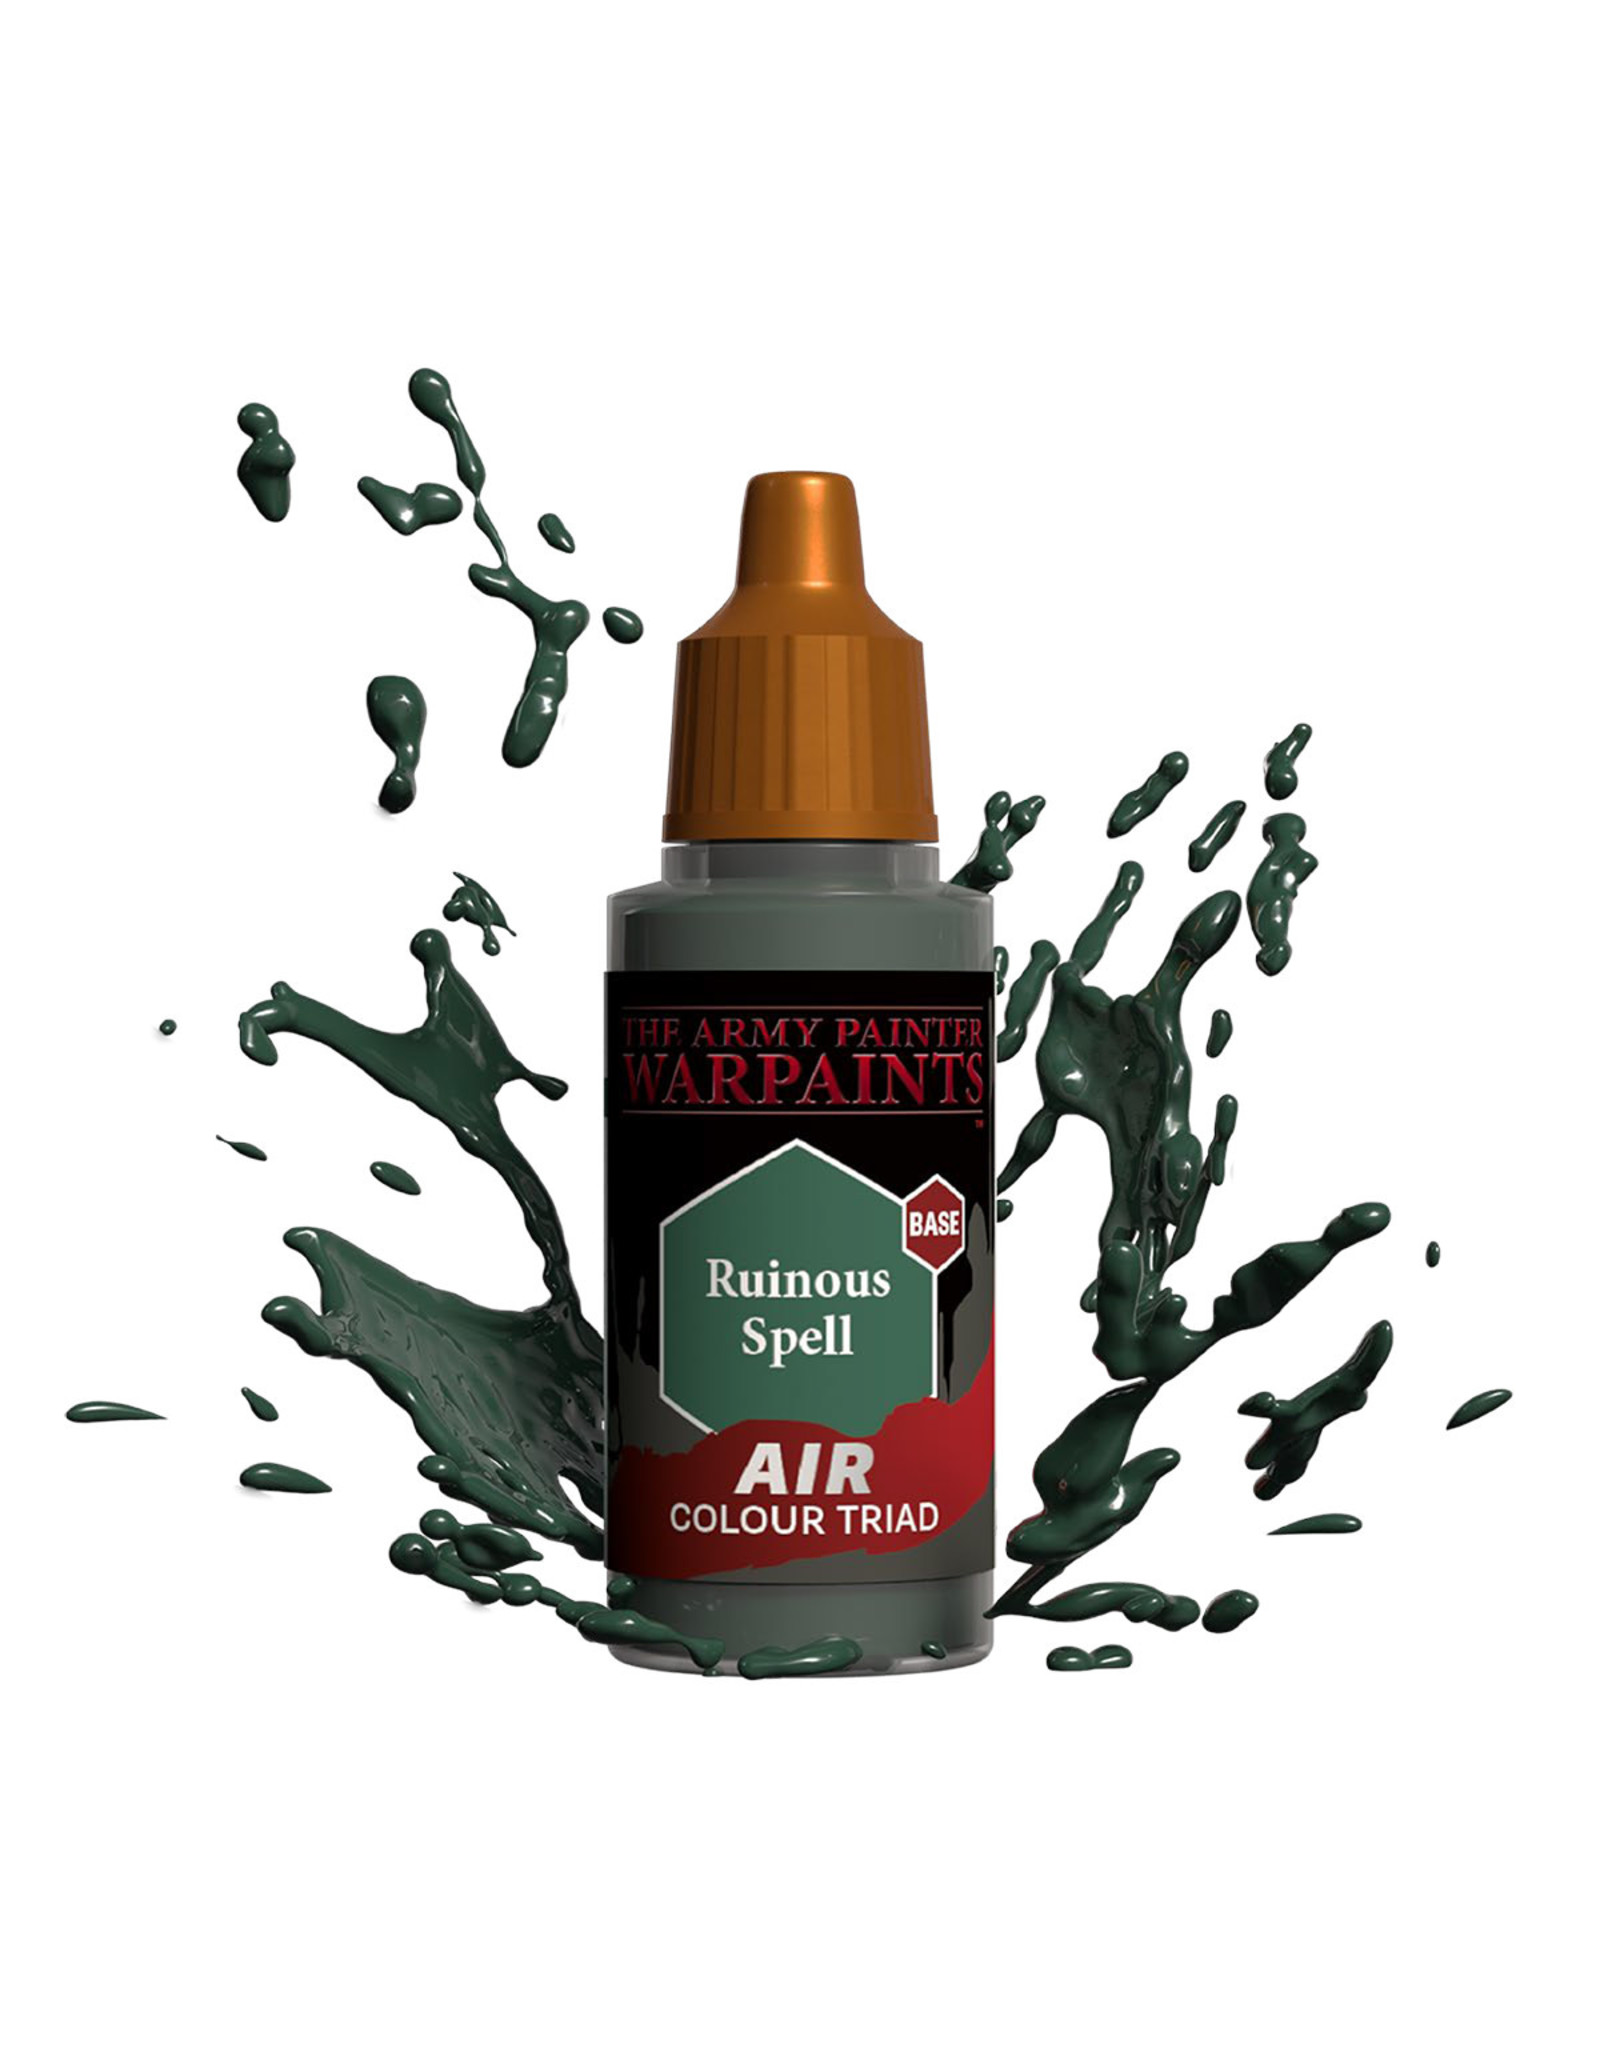 The Army Painter The Army Painter Warpaints Air: Ruinous Spell